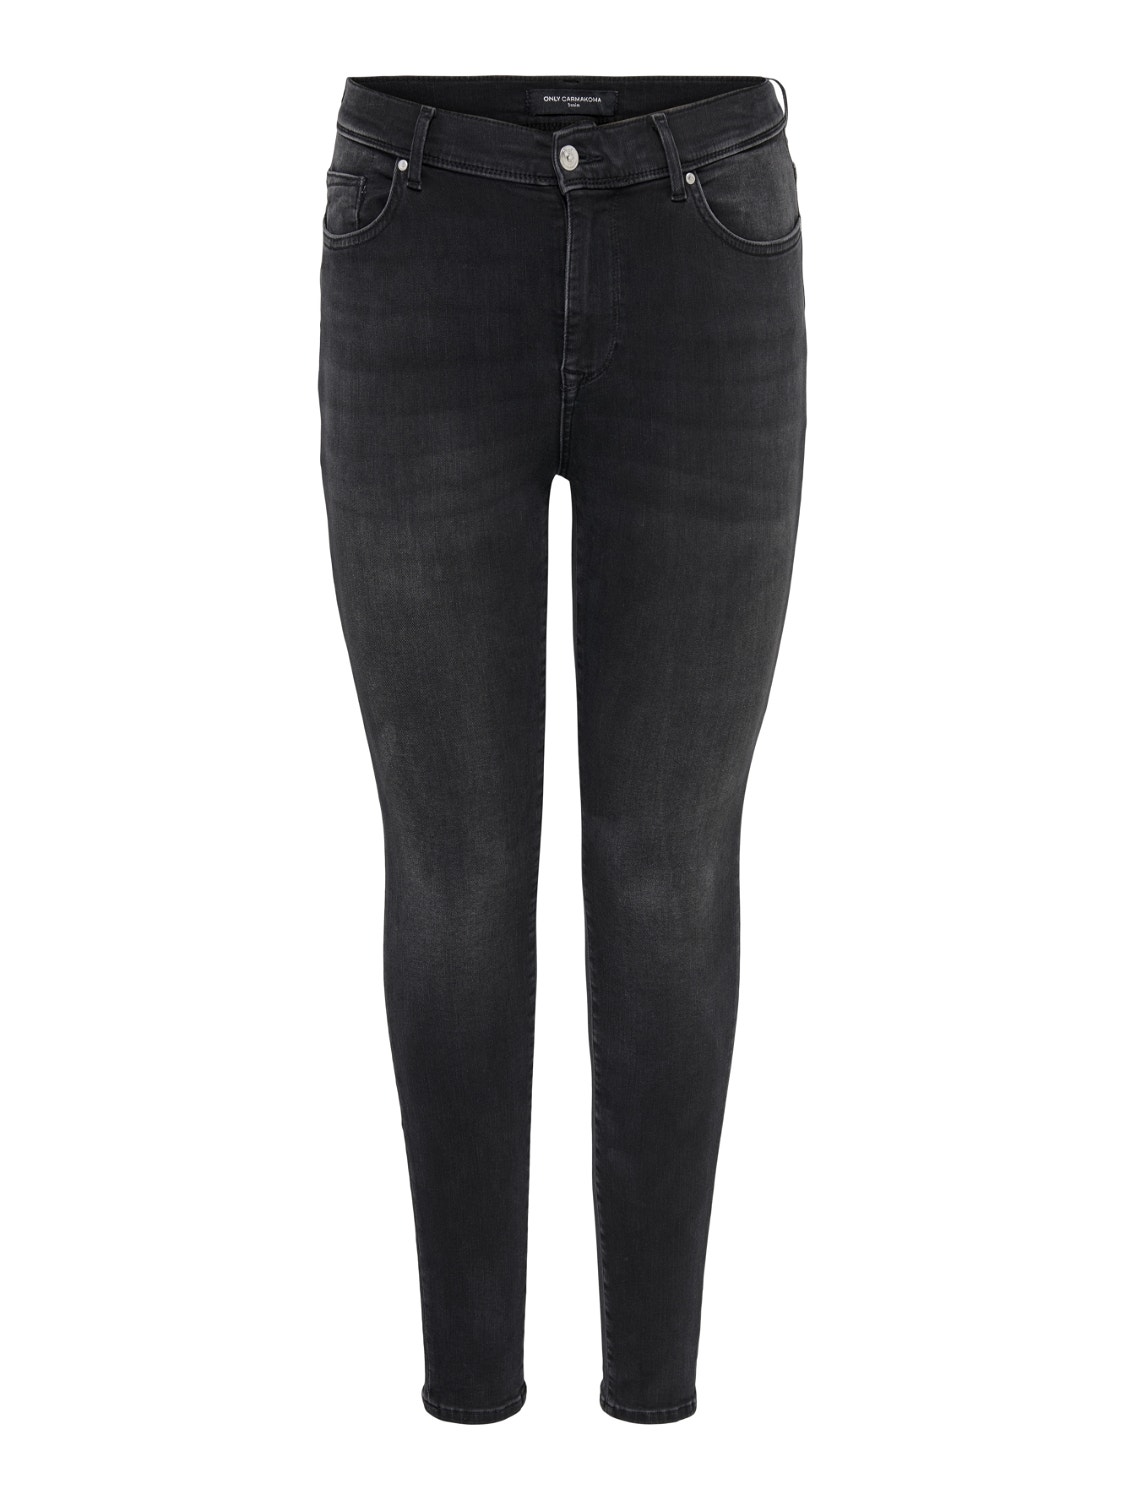 ONLY Skinny Fit Jeans -Black - 15245282